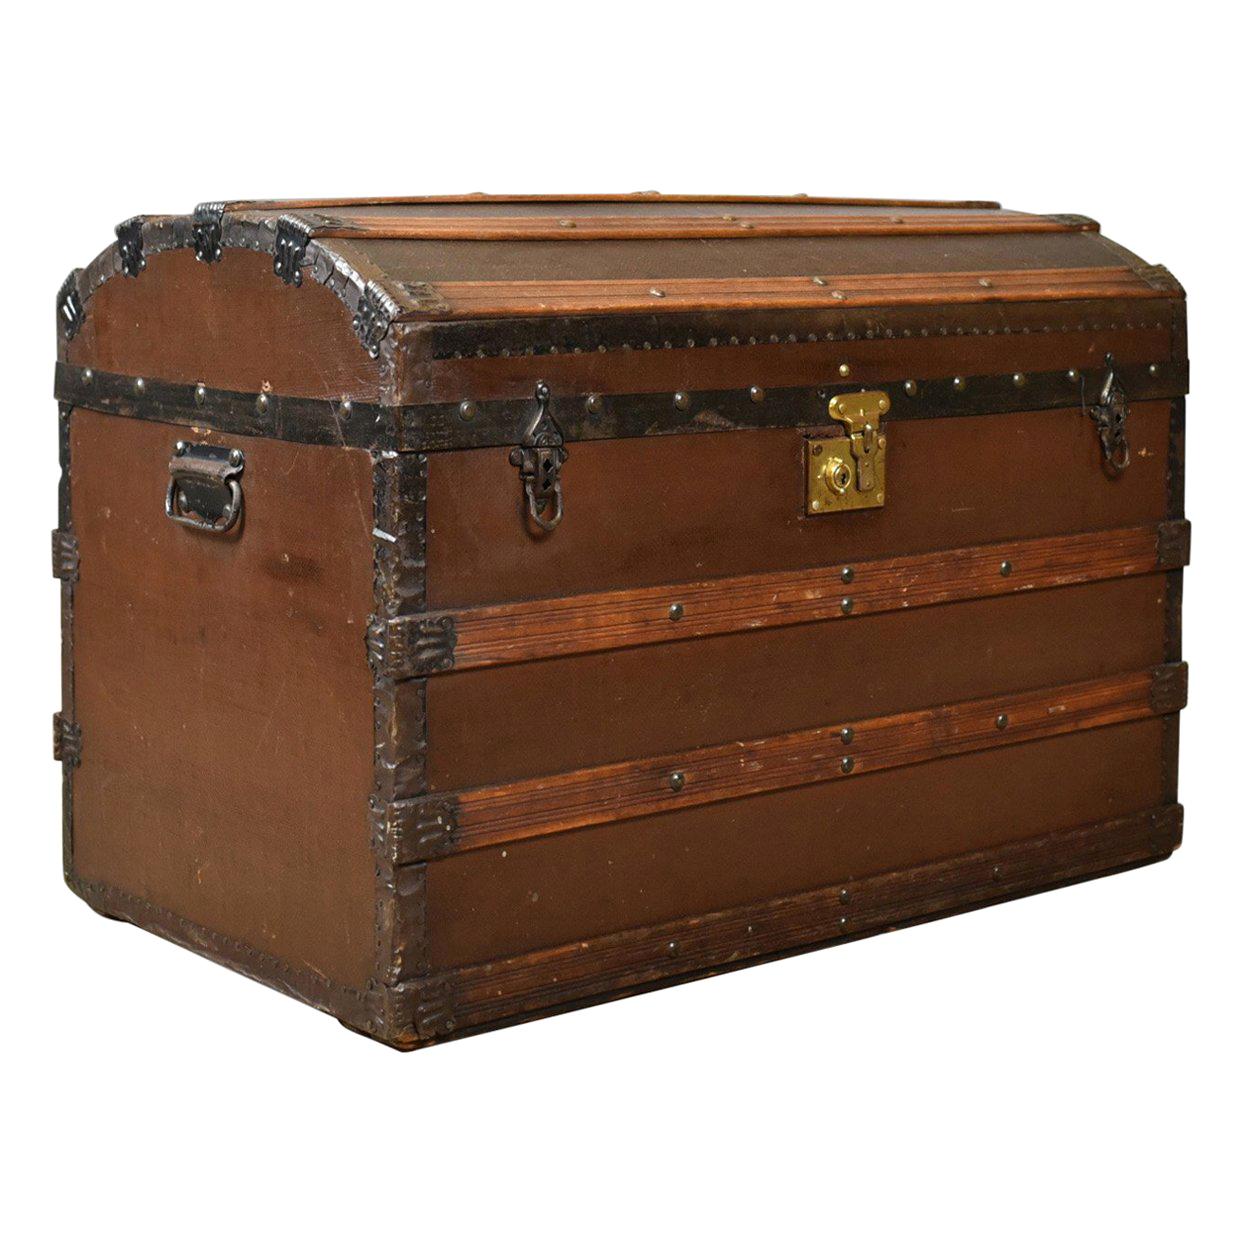 Antique Carriage Chest, Victorian, Dome Topped Trunk, 19th Century, circa 1890